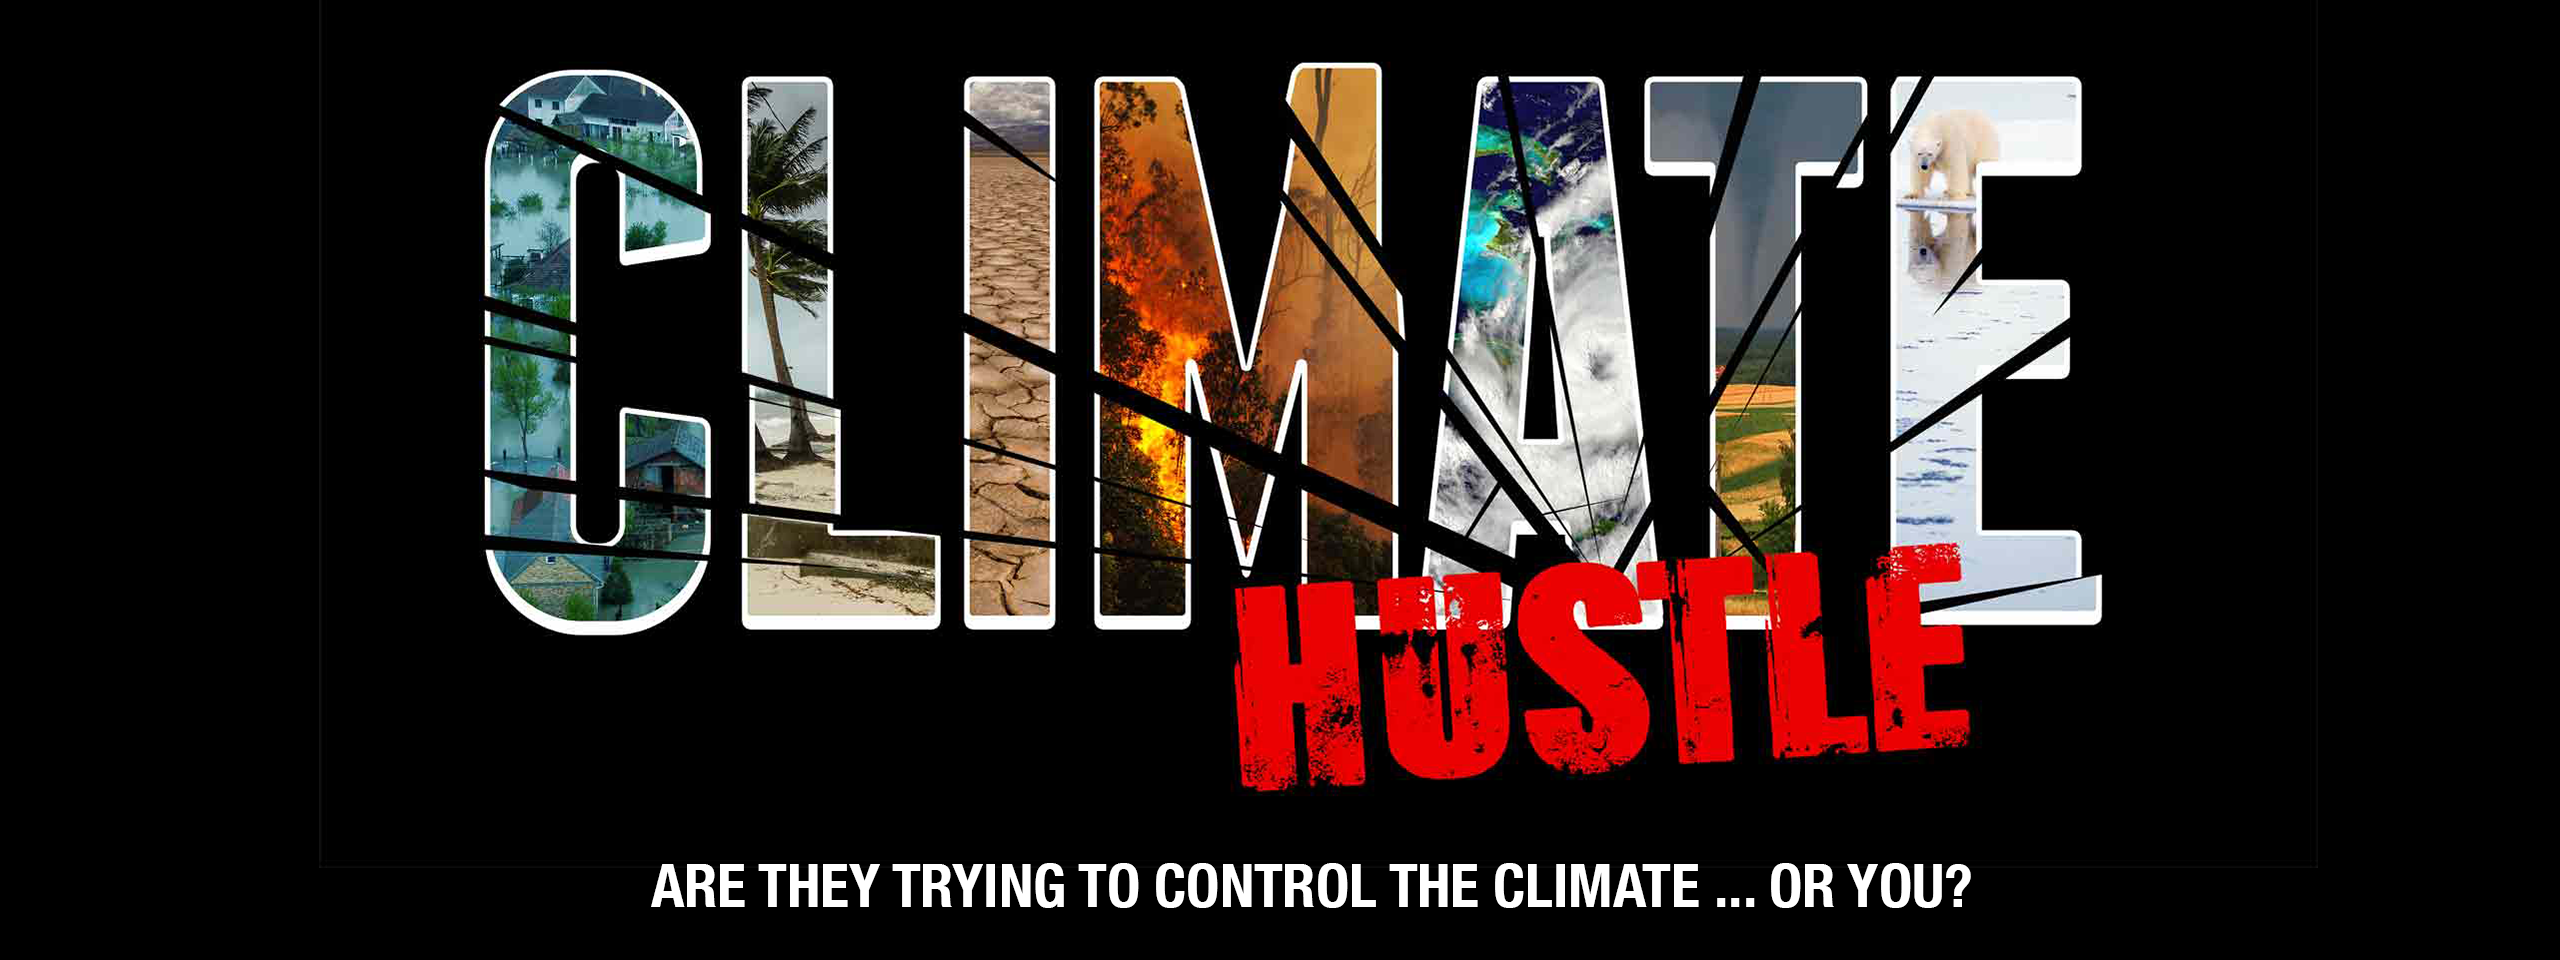 Skeptical Climate Documentary Set to Rock UN Climate Summit – ‘Climate Hustle’ To Have Red Carpet Premiere in Paris